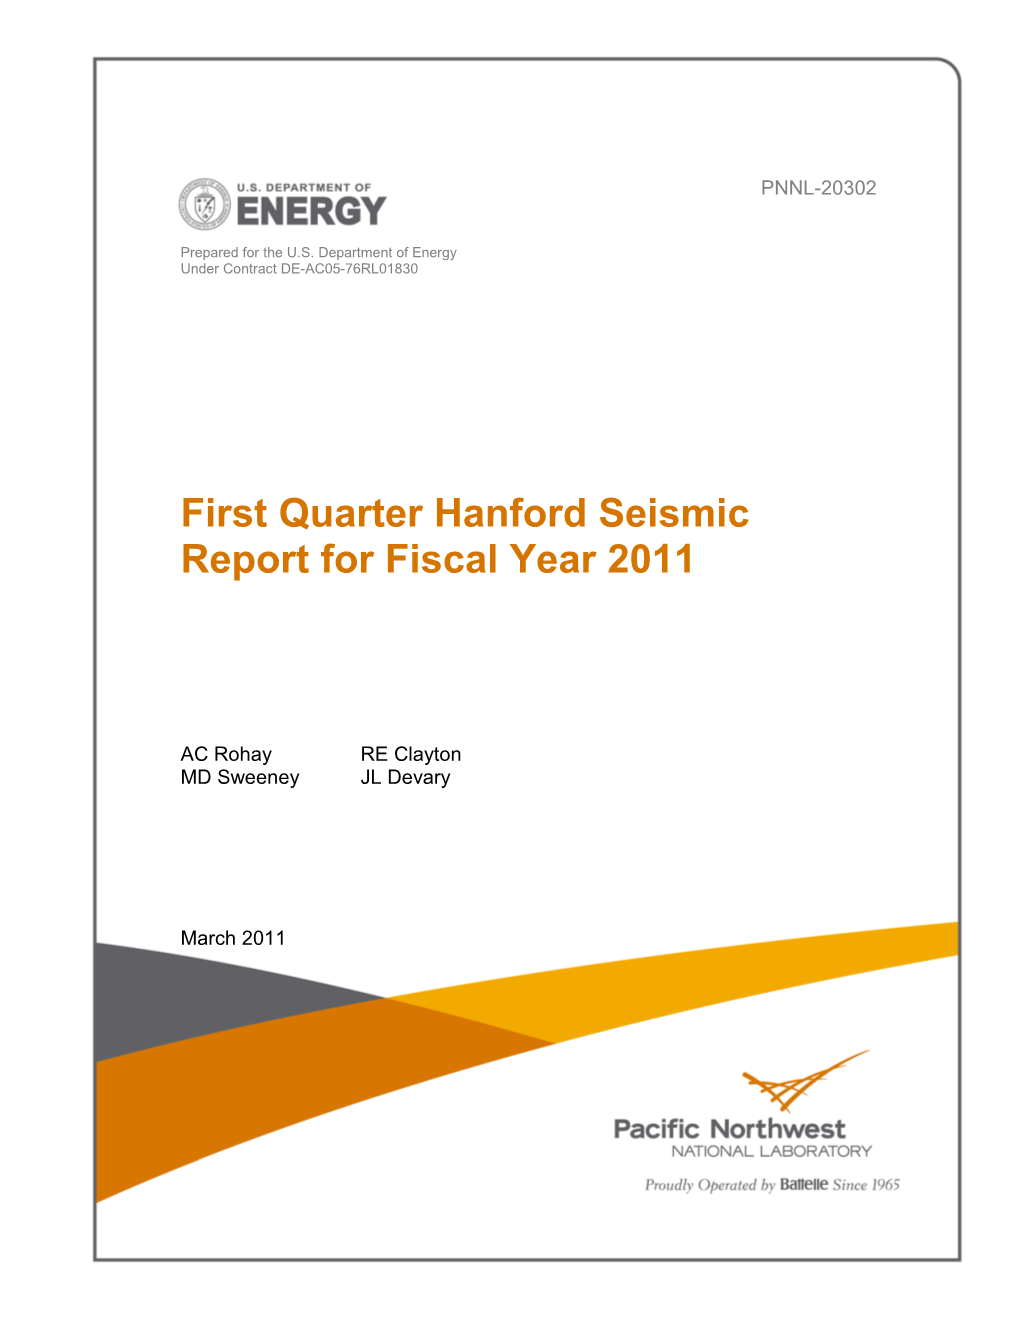 First Quarter Hanford Seismic Report for Fiscal Year 2011